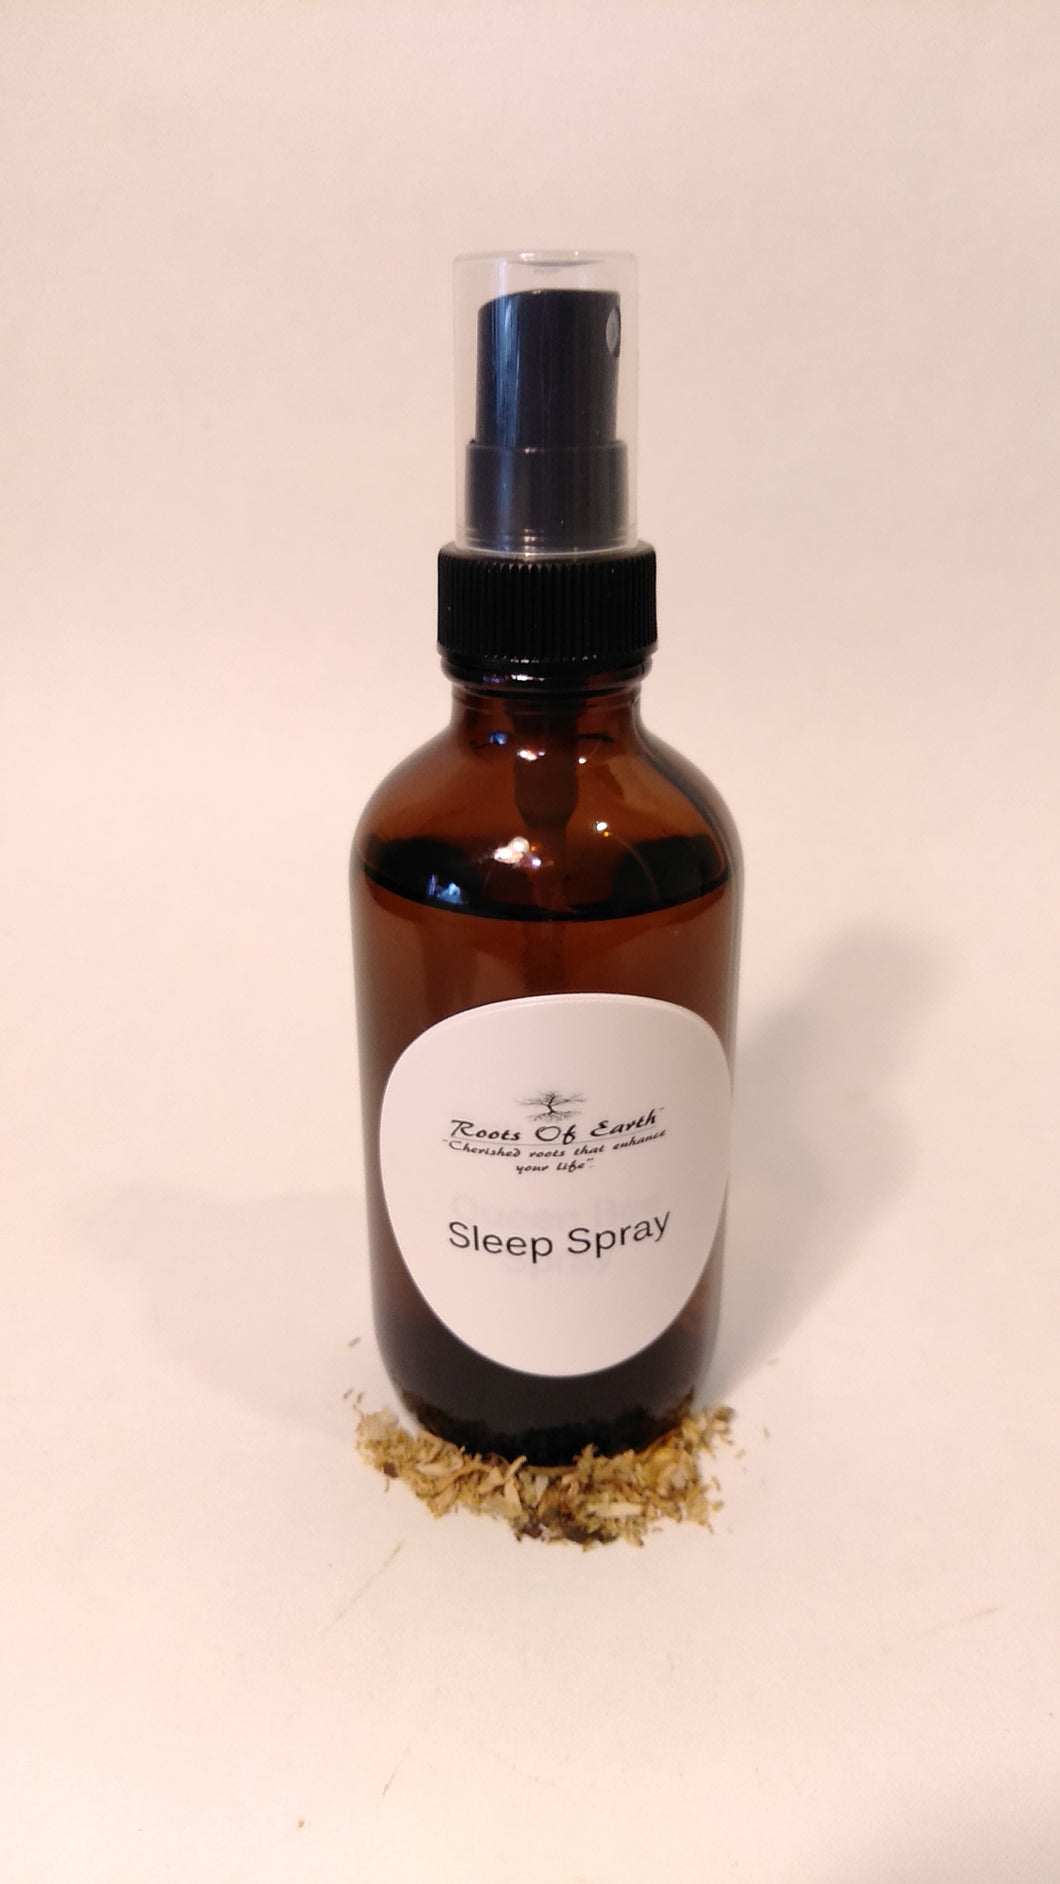 Sleep Peace Body or Room Spray Calm Sleep Relaxing By Roots Of Earth